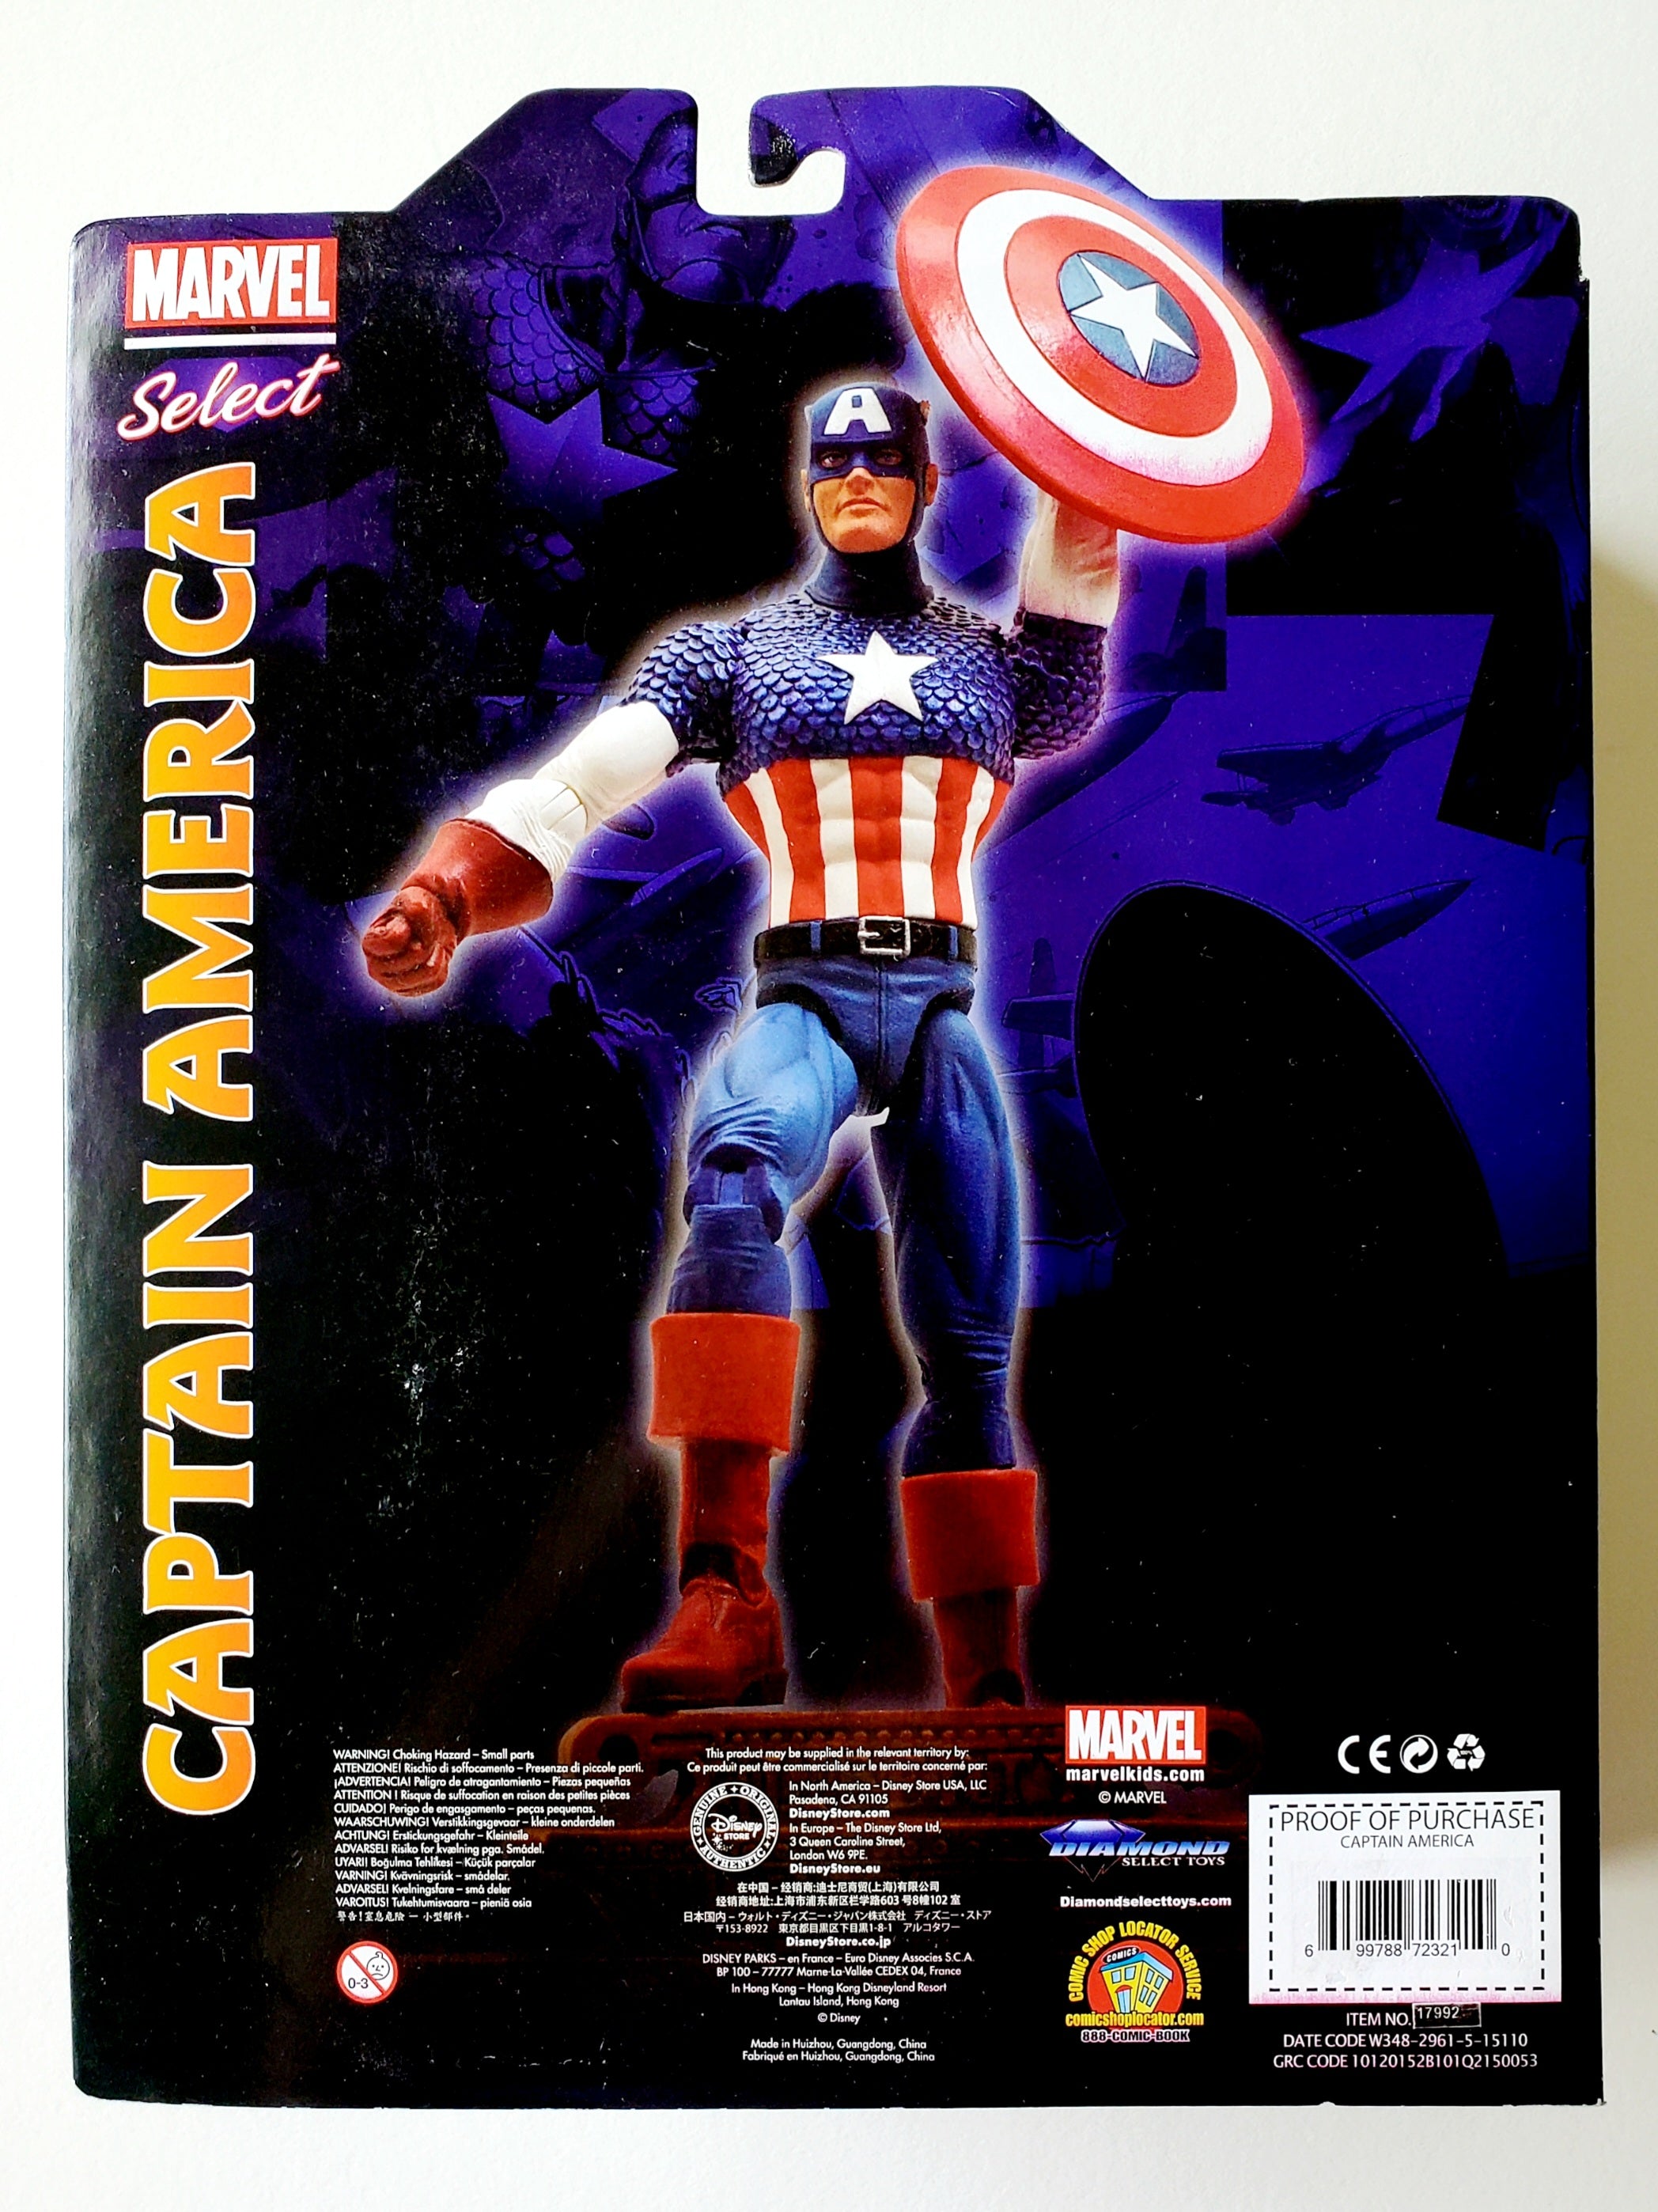 Marvel Select Exclusive Captain America Action Figure